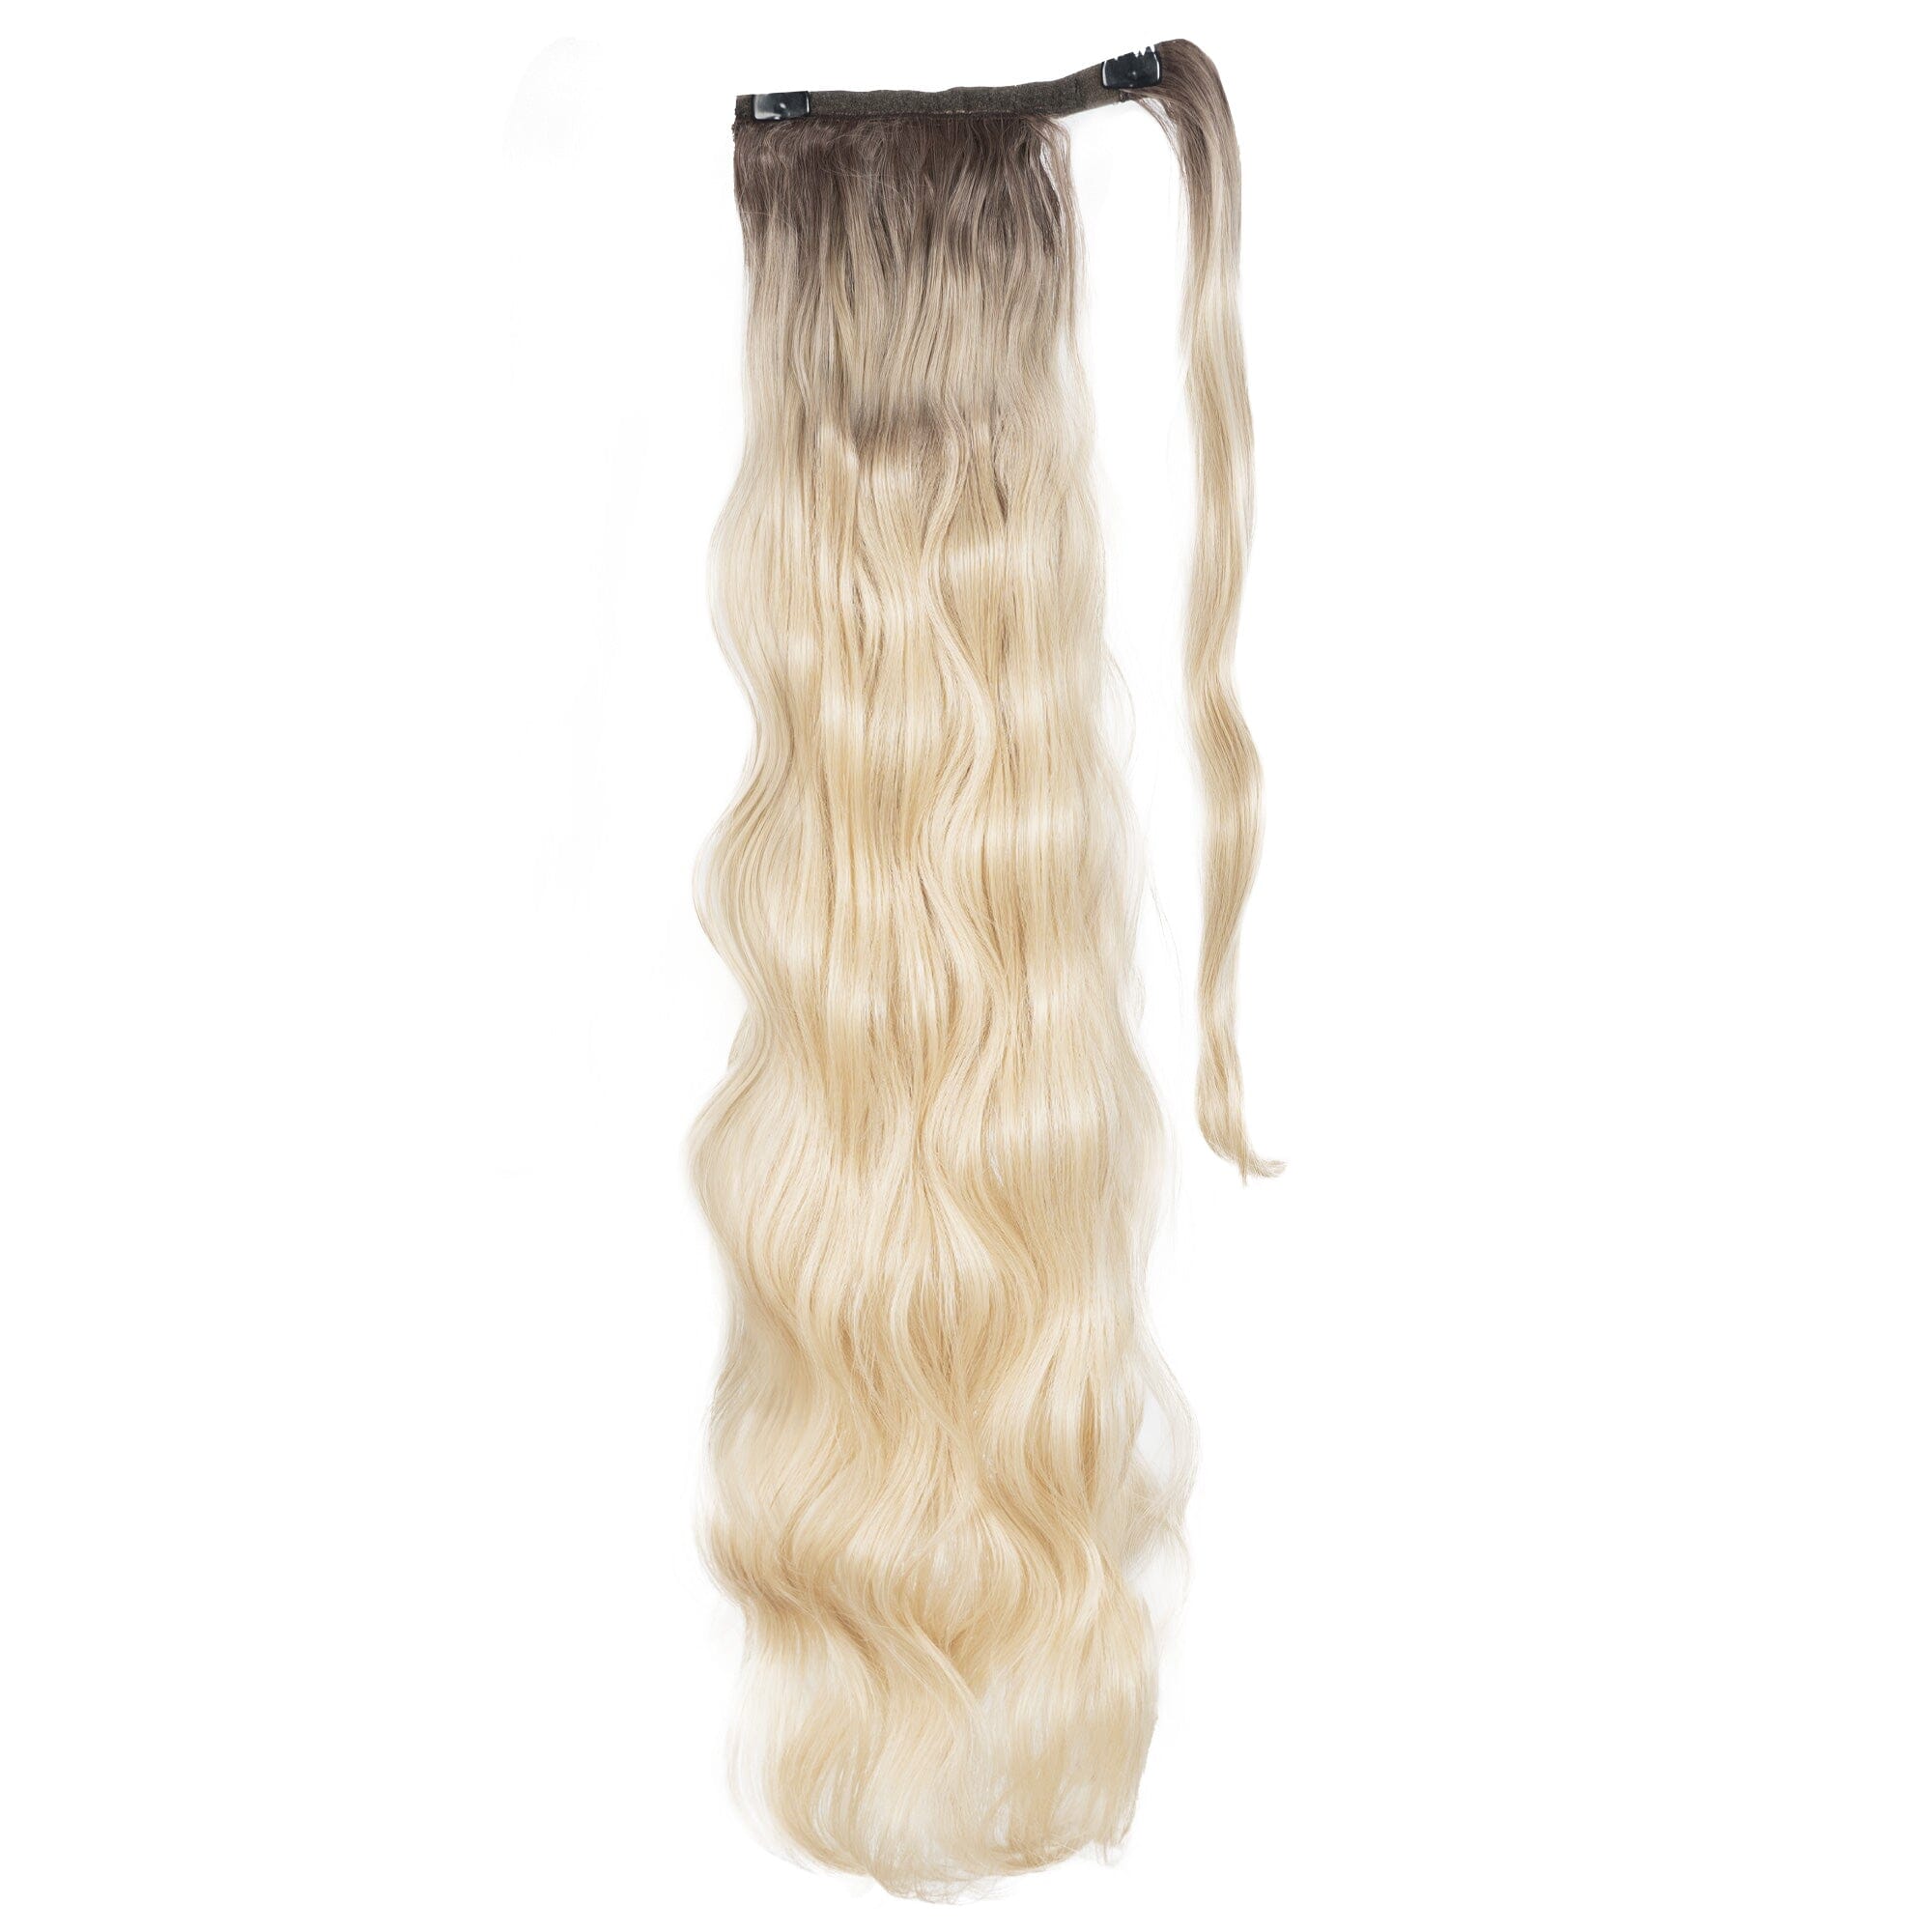 Long Clip-In Ponytails (22" - 30") Clip In Ponytail Easilocks 30"Body Wave Clip-In Ponytail Rooted Blonde 